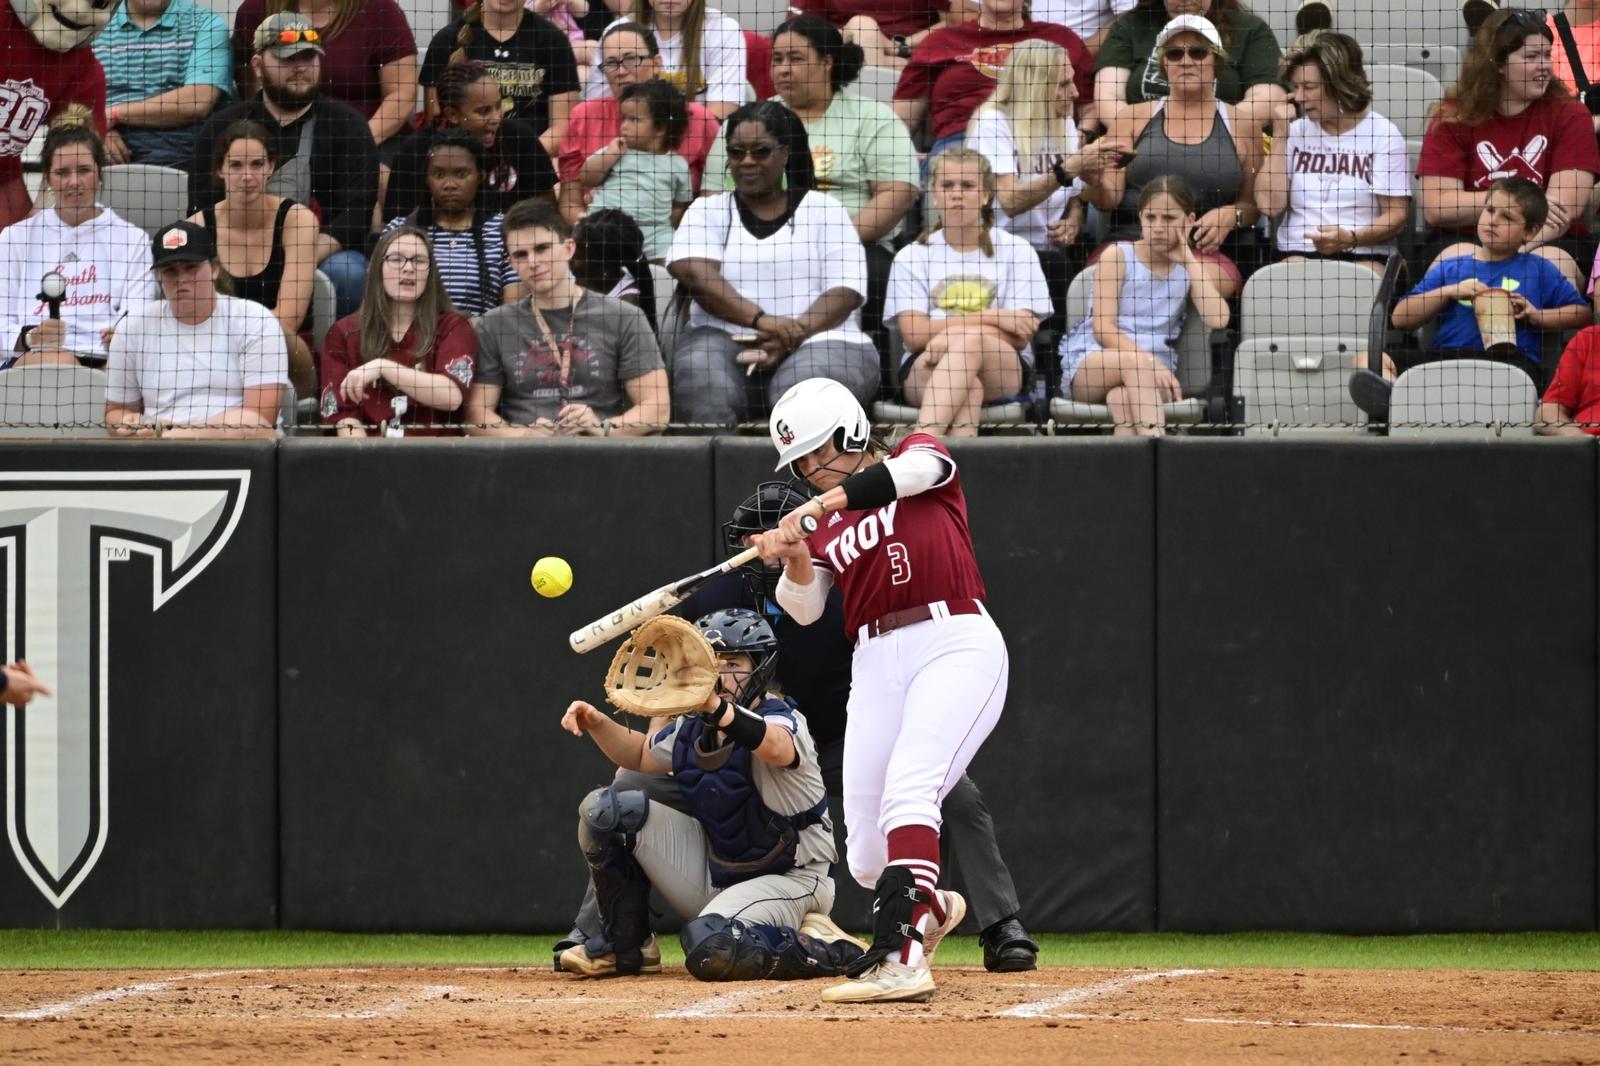 Troy vs. South Alabama: Game 2 Loss Sets Up Must-Win Rubber Match